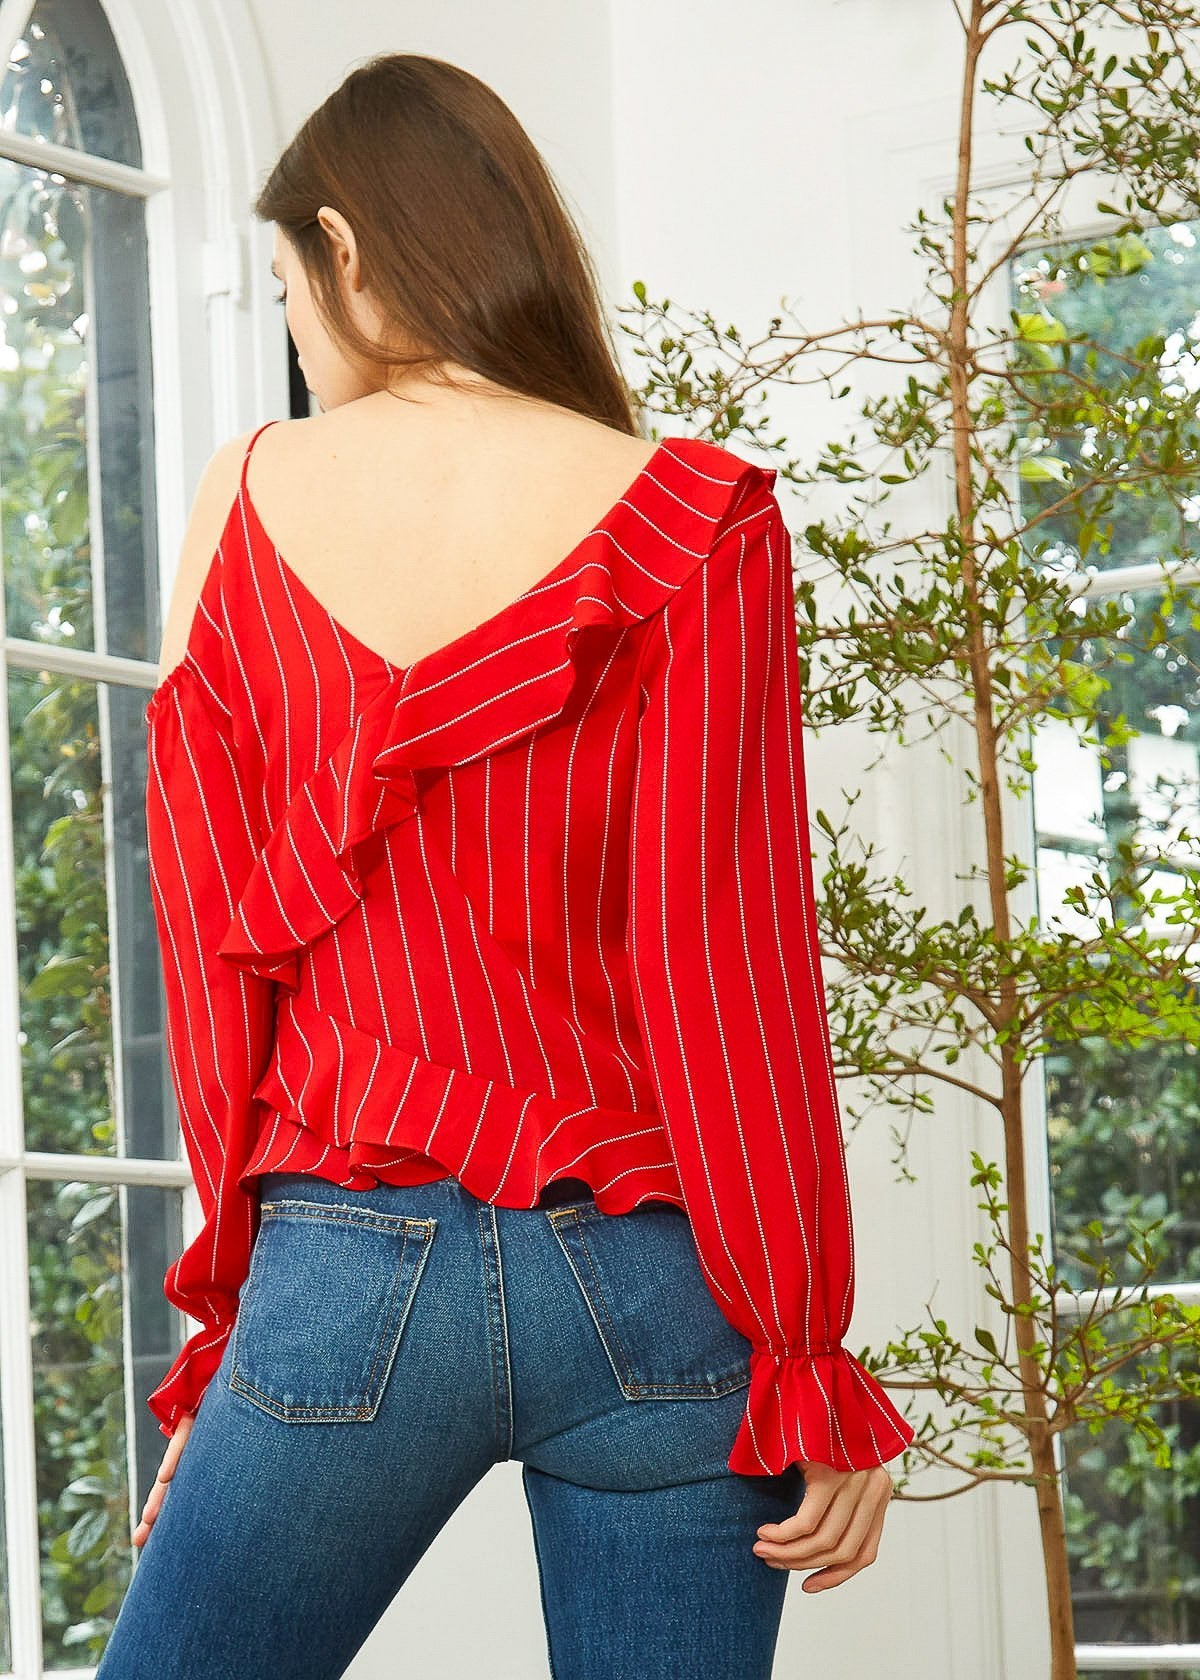 Make a statement with our stunning red ruffle blouse. Perfect for any occasion, this blouse exudes elegance and confidence. Shop now!